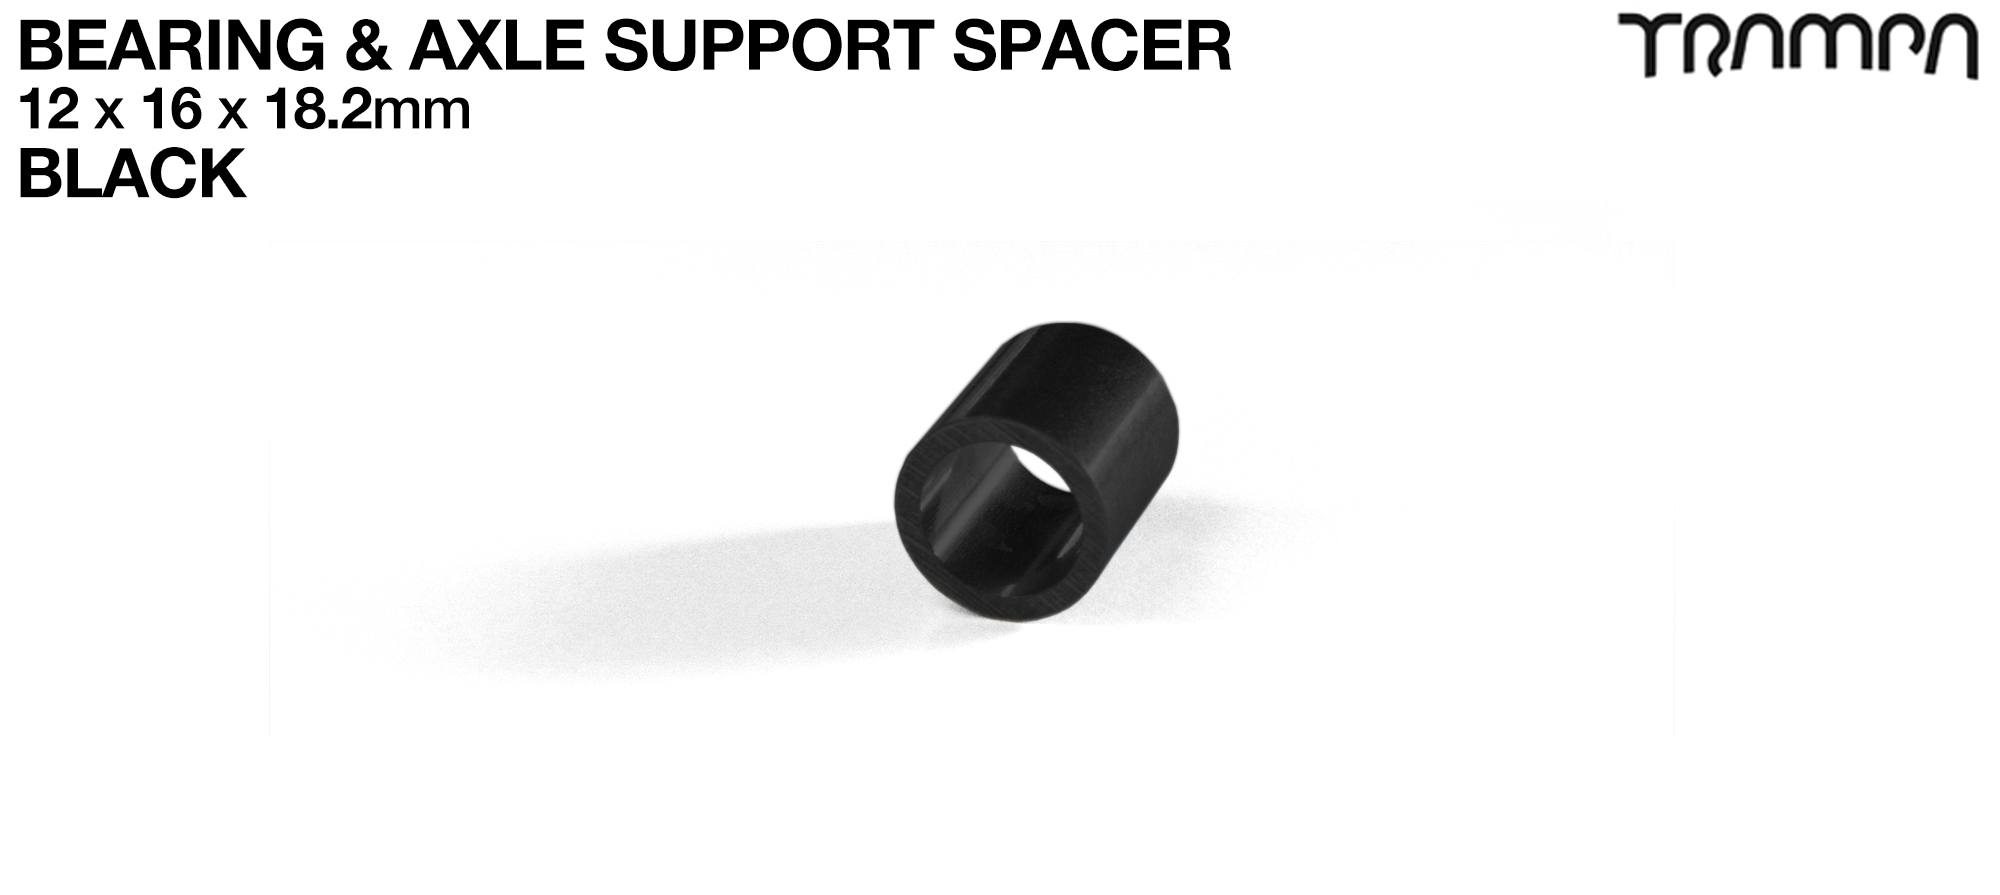 BLACK 18.2mm Wheel Support Axle Spacers 